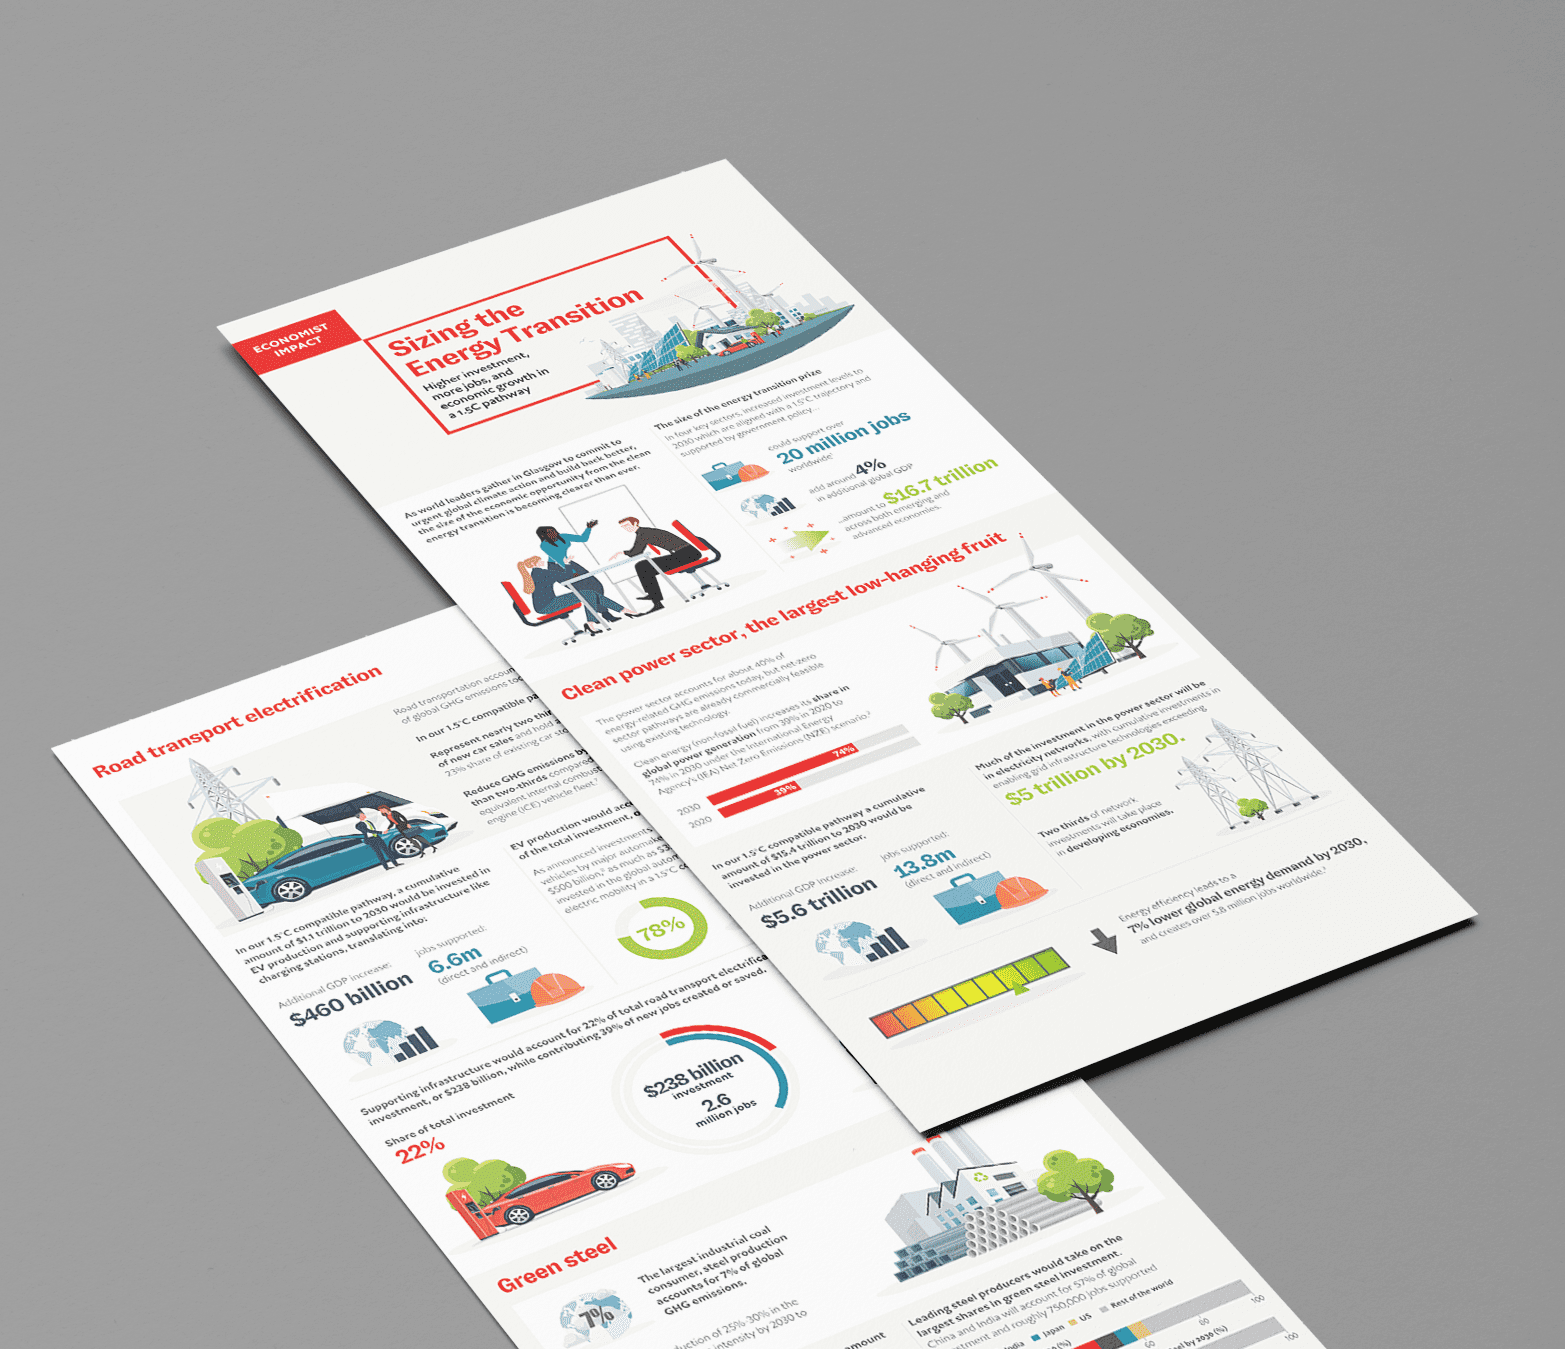 A two-page infographic titled "Sizing the Energy Transition" details statistics and benefits of green energy, including job creation, road transport electrification, and clean power sector advancements. Expertly designed for optimal SEO, it highlights data with compelling visuals.